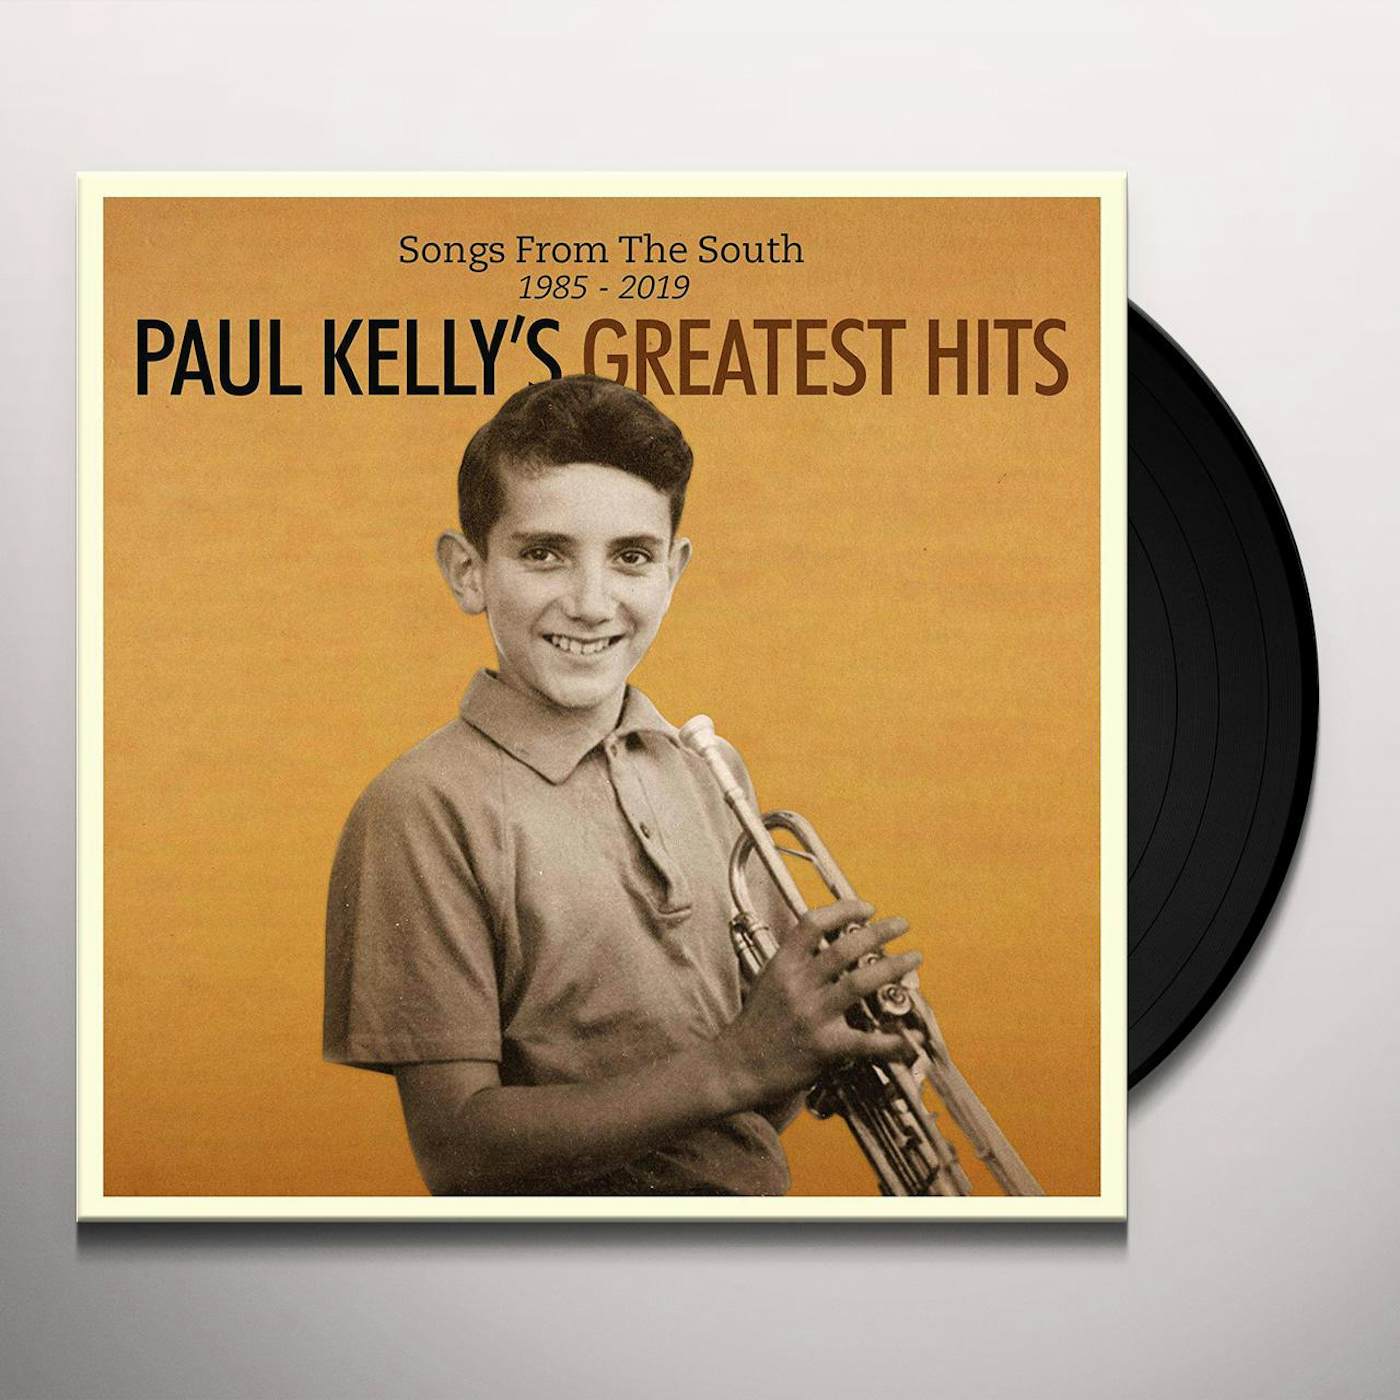 Paul Kelly Songs from the South. Greatest Hits (1985-2019) Vinyl Record